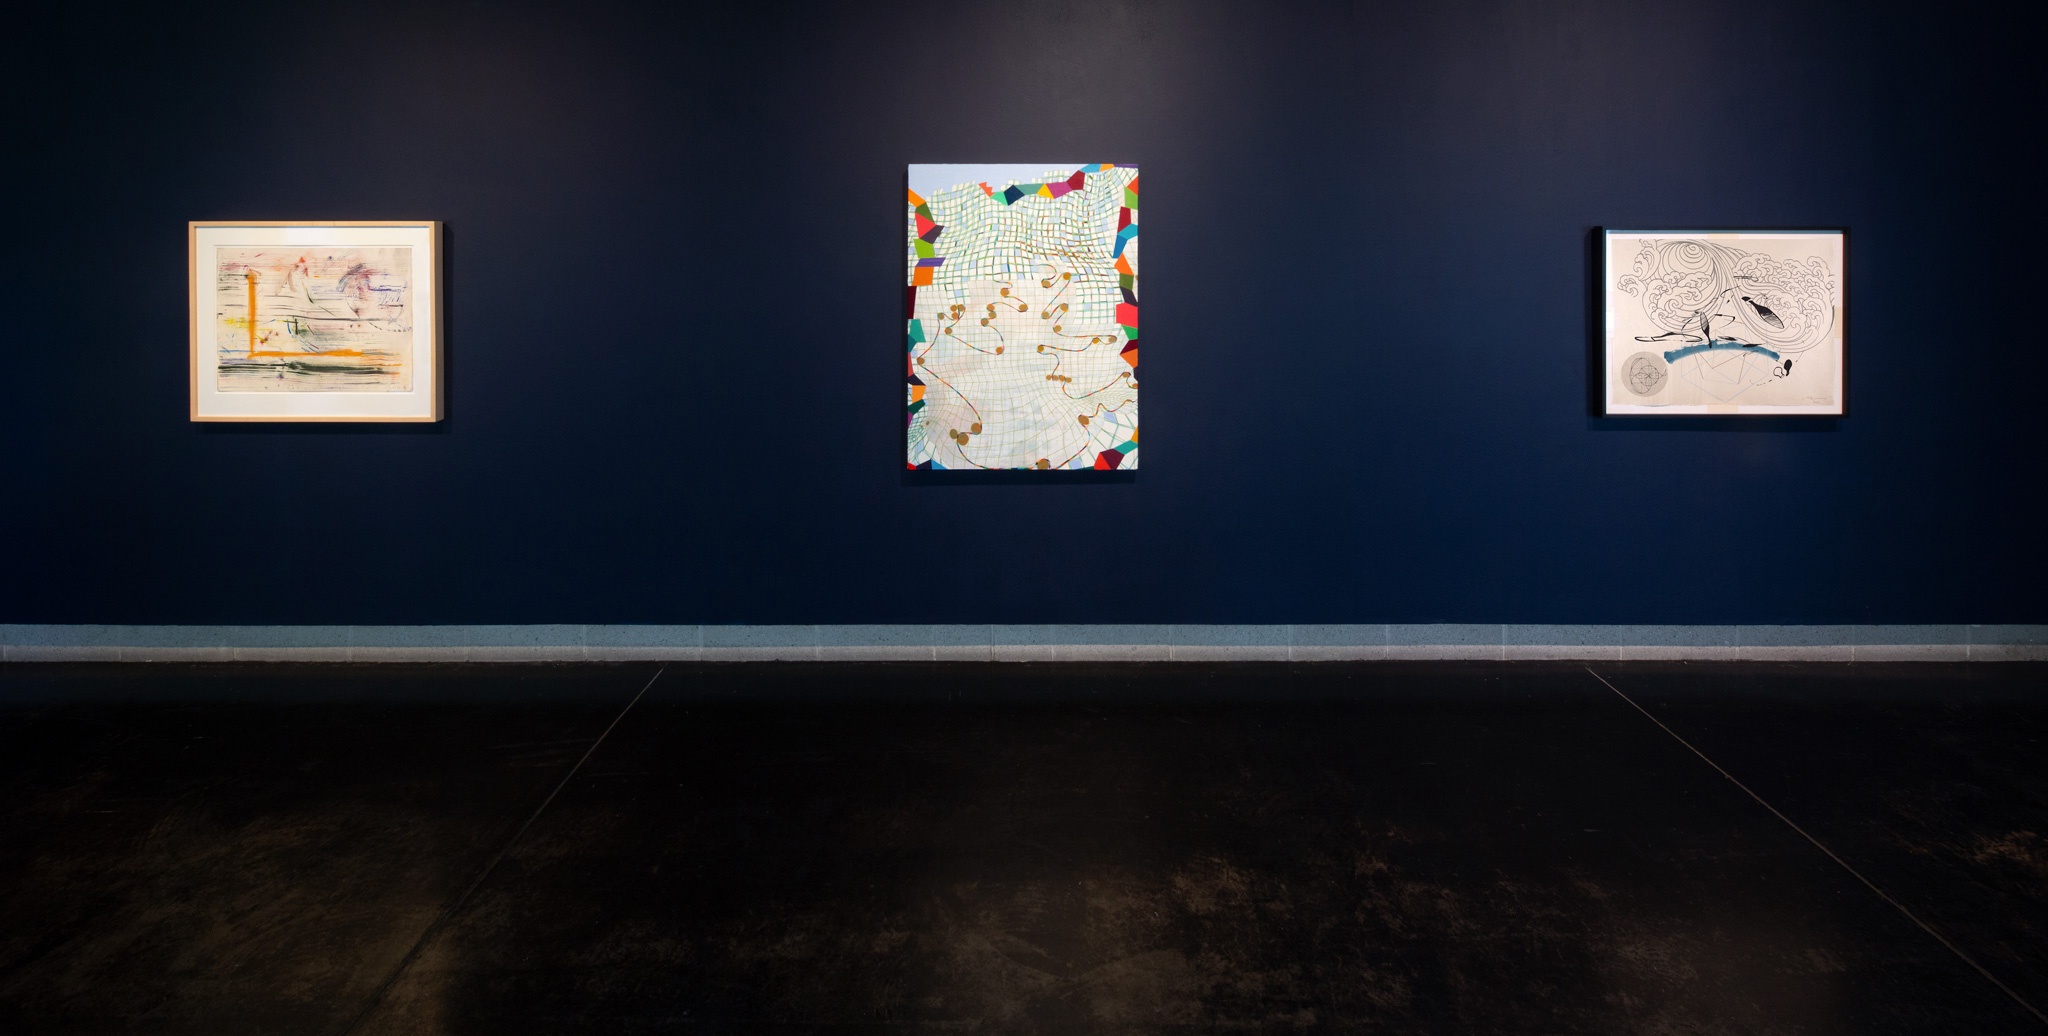 A dimly lit room with three abstract artworks hanging on a dark blue wall.